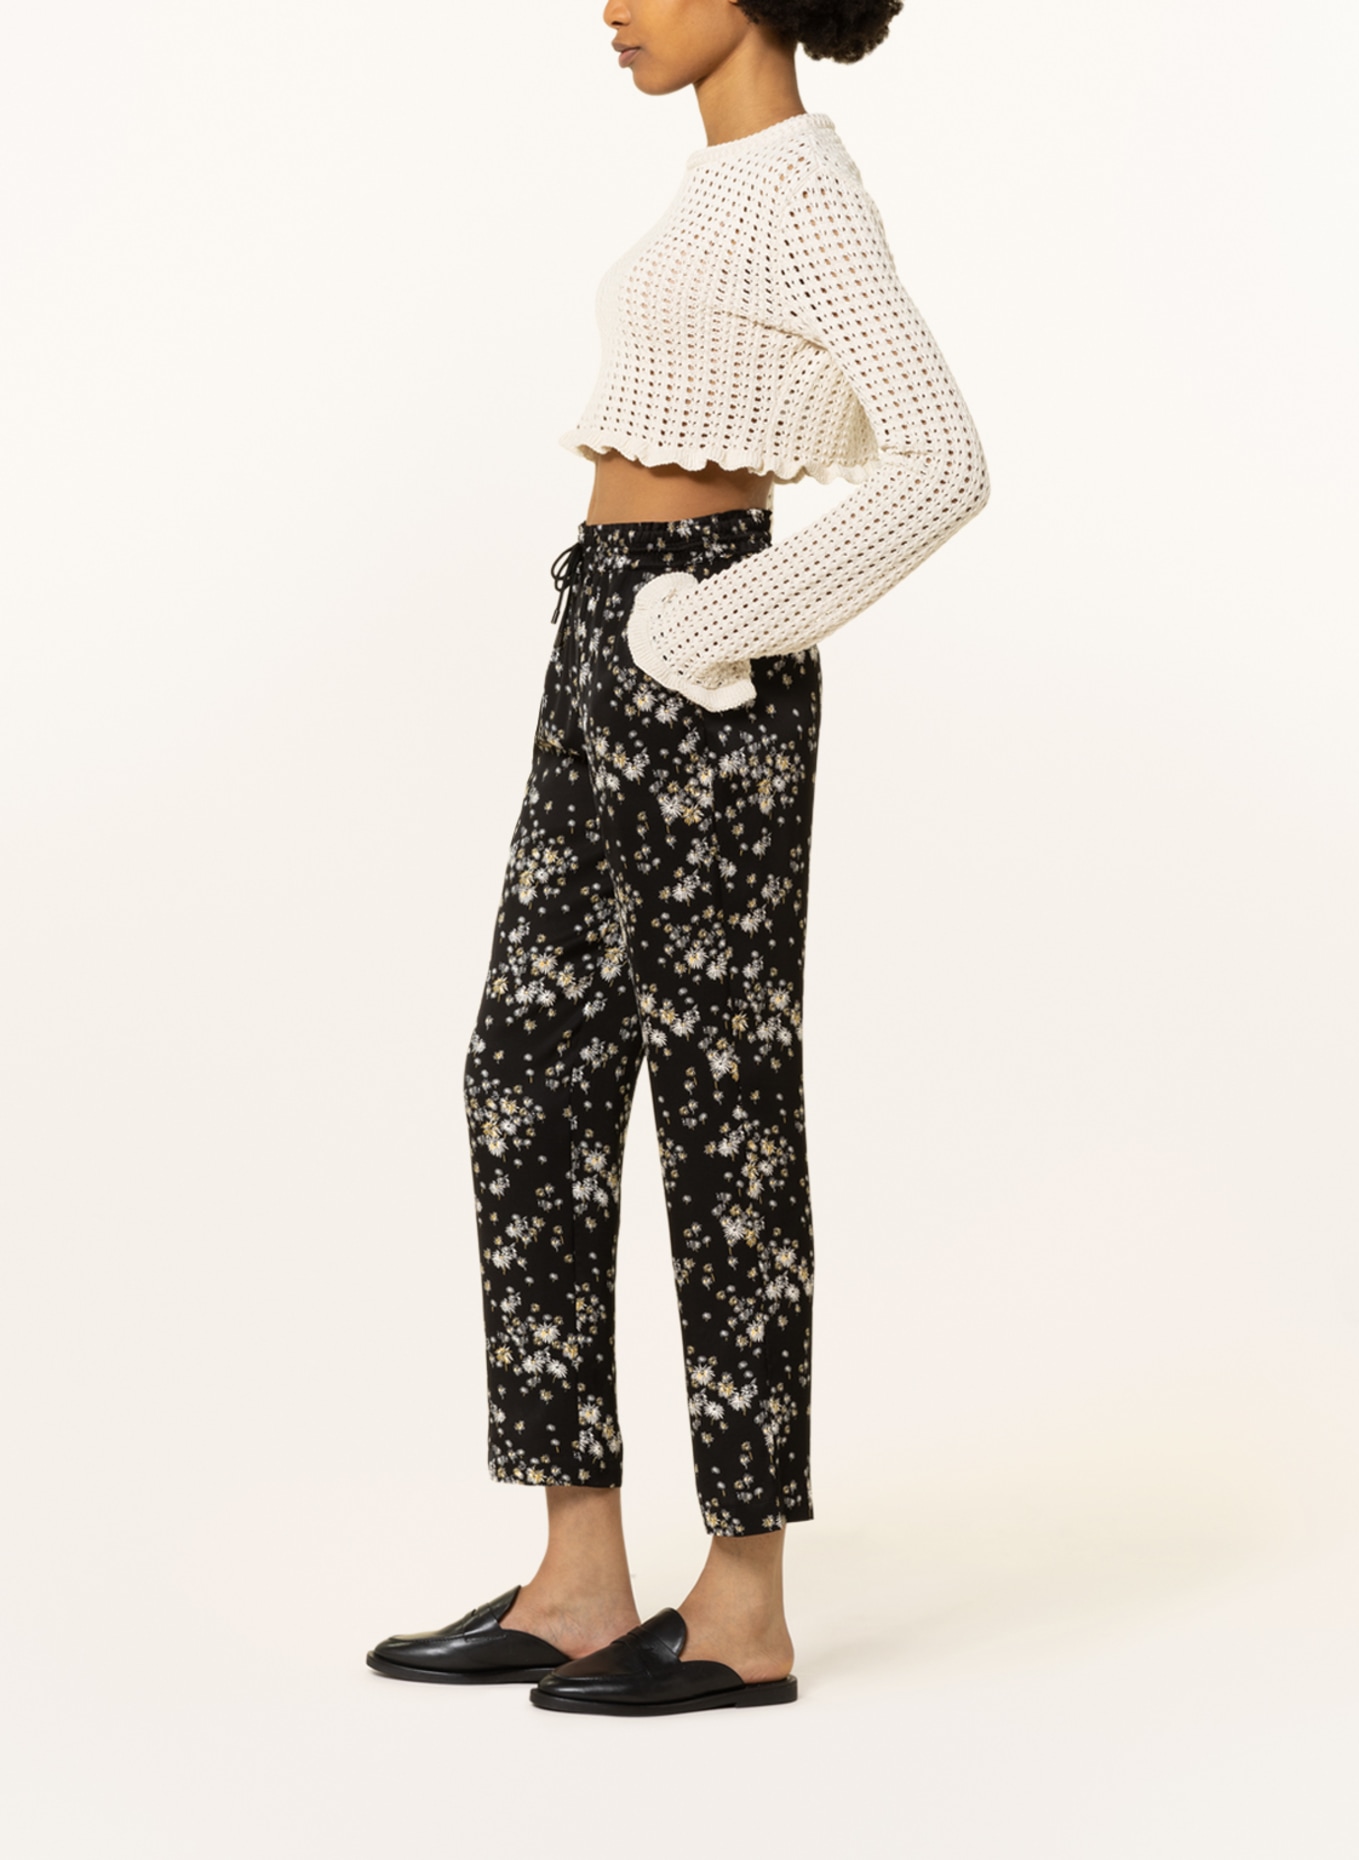 SCOTCH & SODA Trousers NINA in jogger style, Color: BLACK/ WHITE/ LIGHT YELLOW (Image 4)